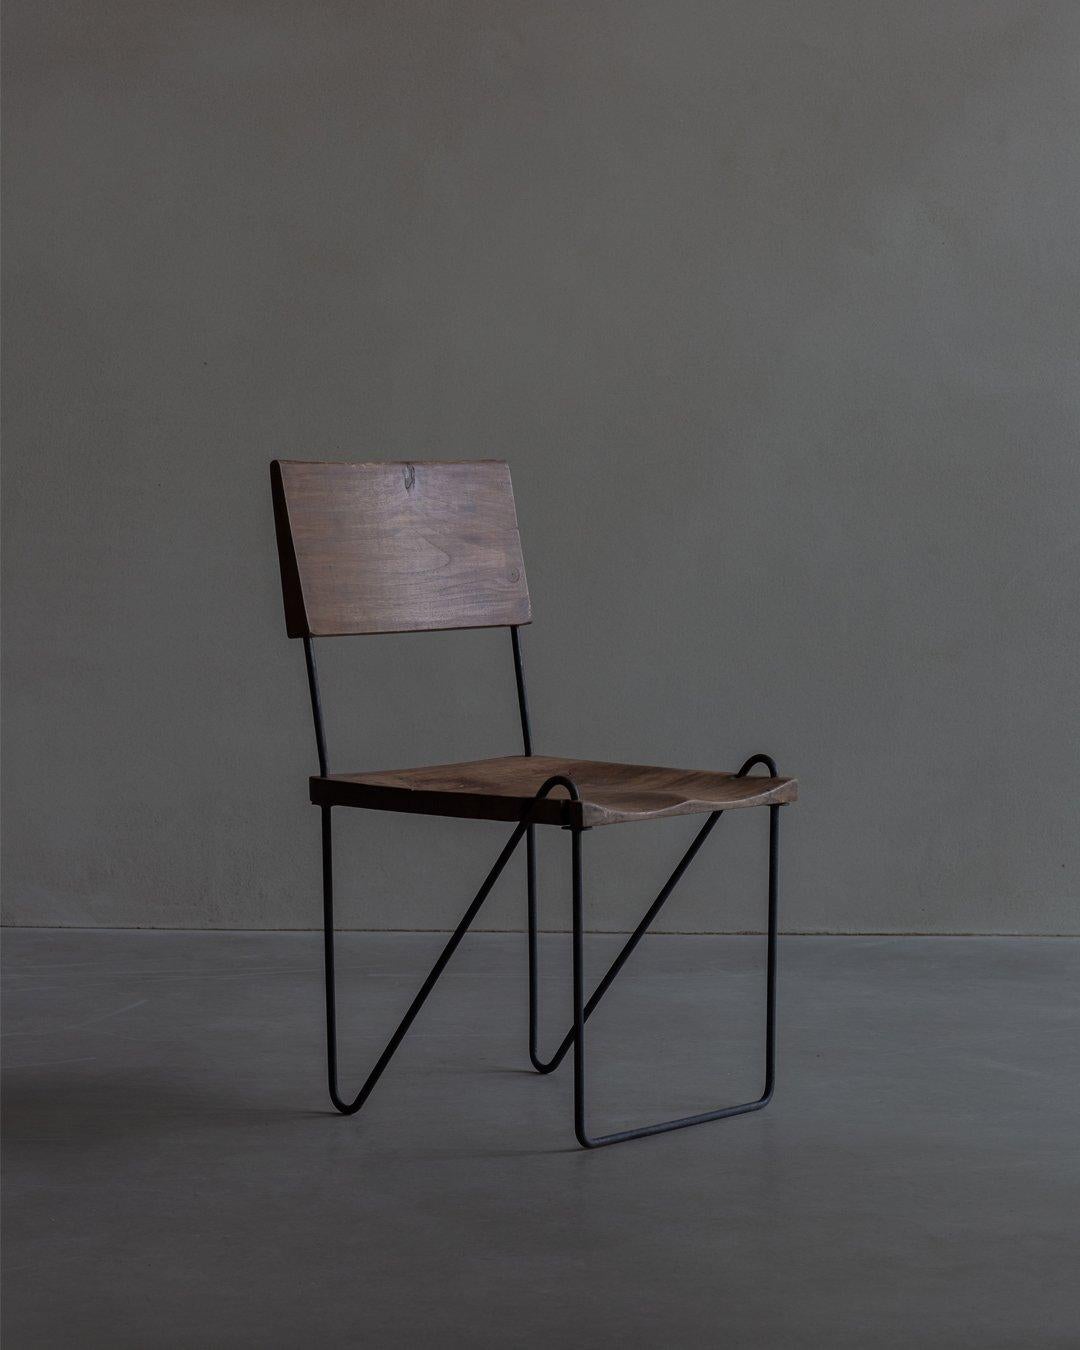 Teak and iron chair, designed by Pierre Jeanneret and dating back to circa 1953-1954, features a solid sculpted teak seat and backrest. The backrest is slightly tilted and carved with intricate patterns. The seat is also carved from teak and